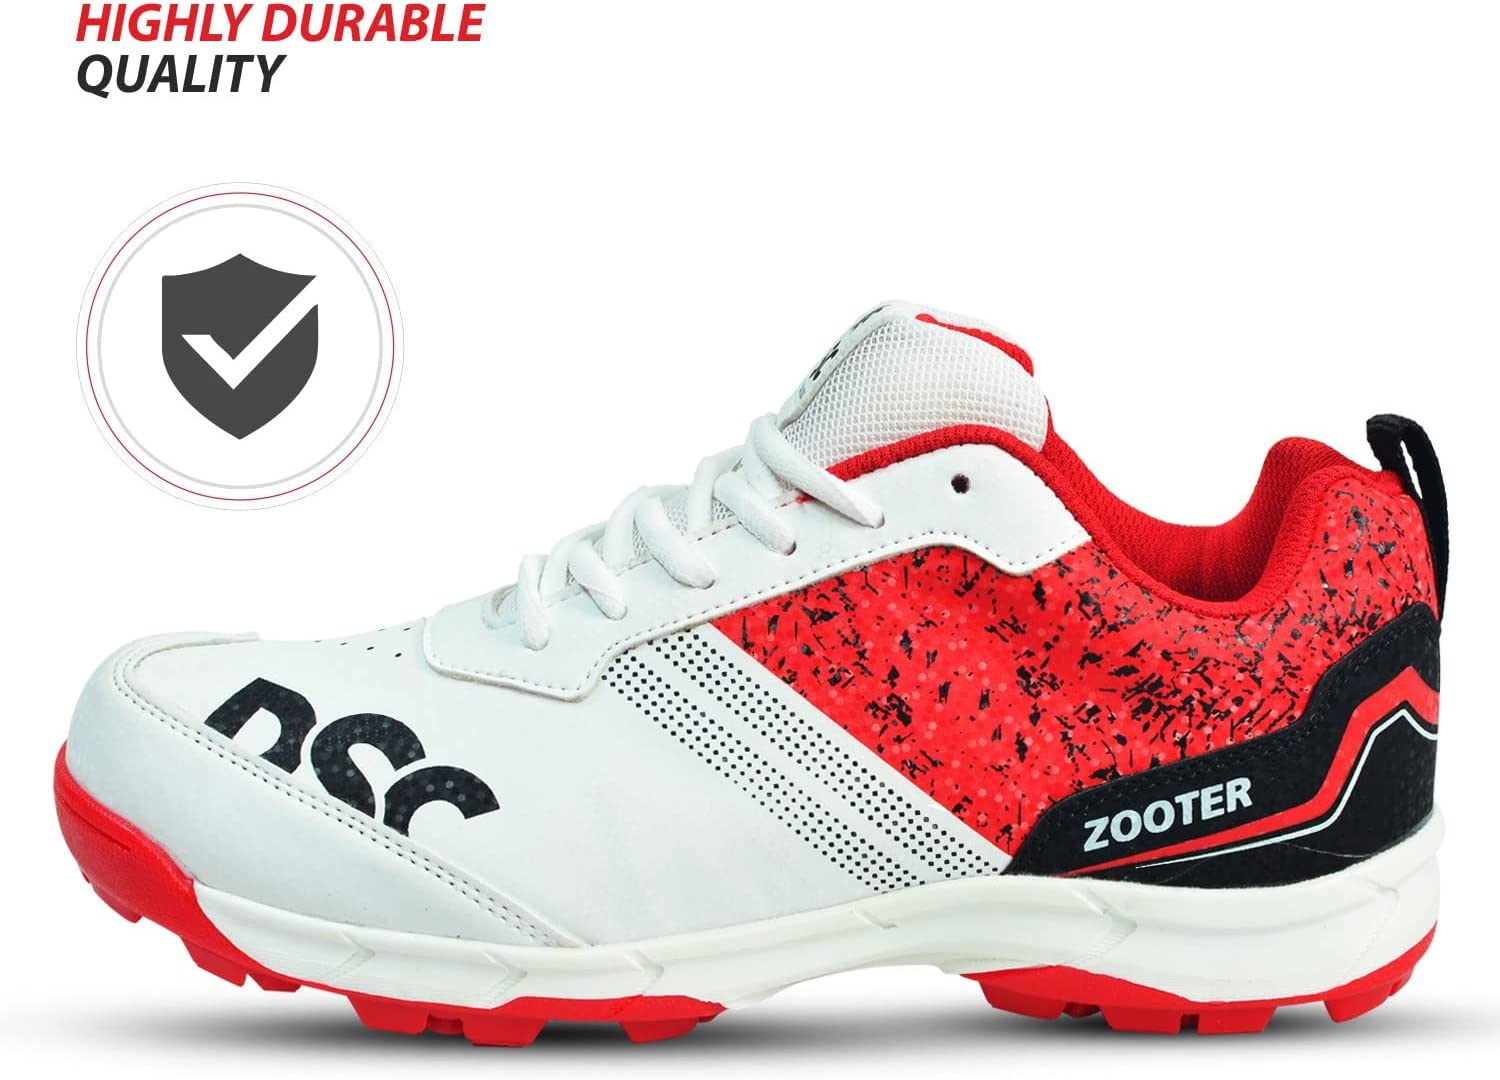 2023 DSC Zooter Cricket Shoes (White-Red)